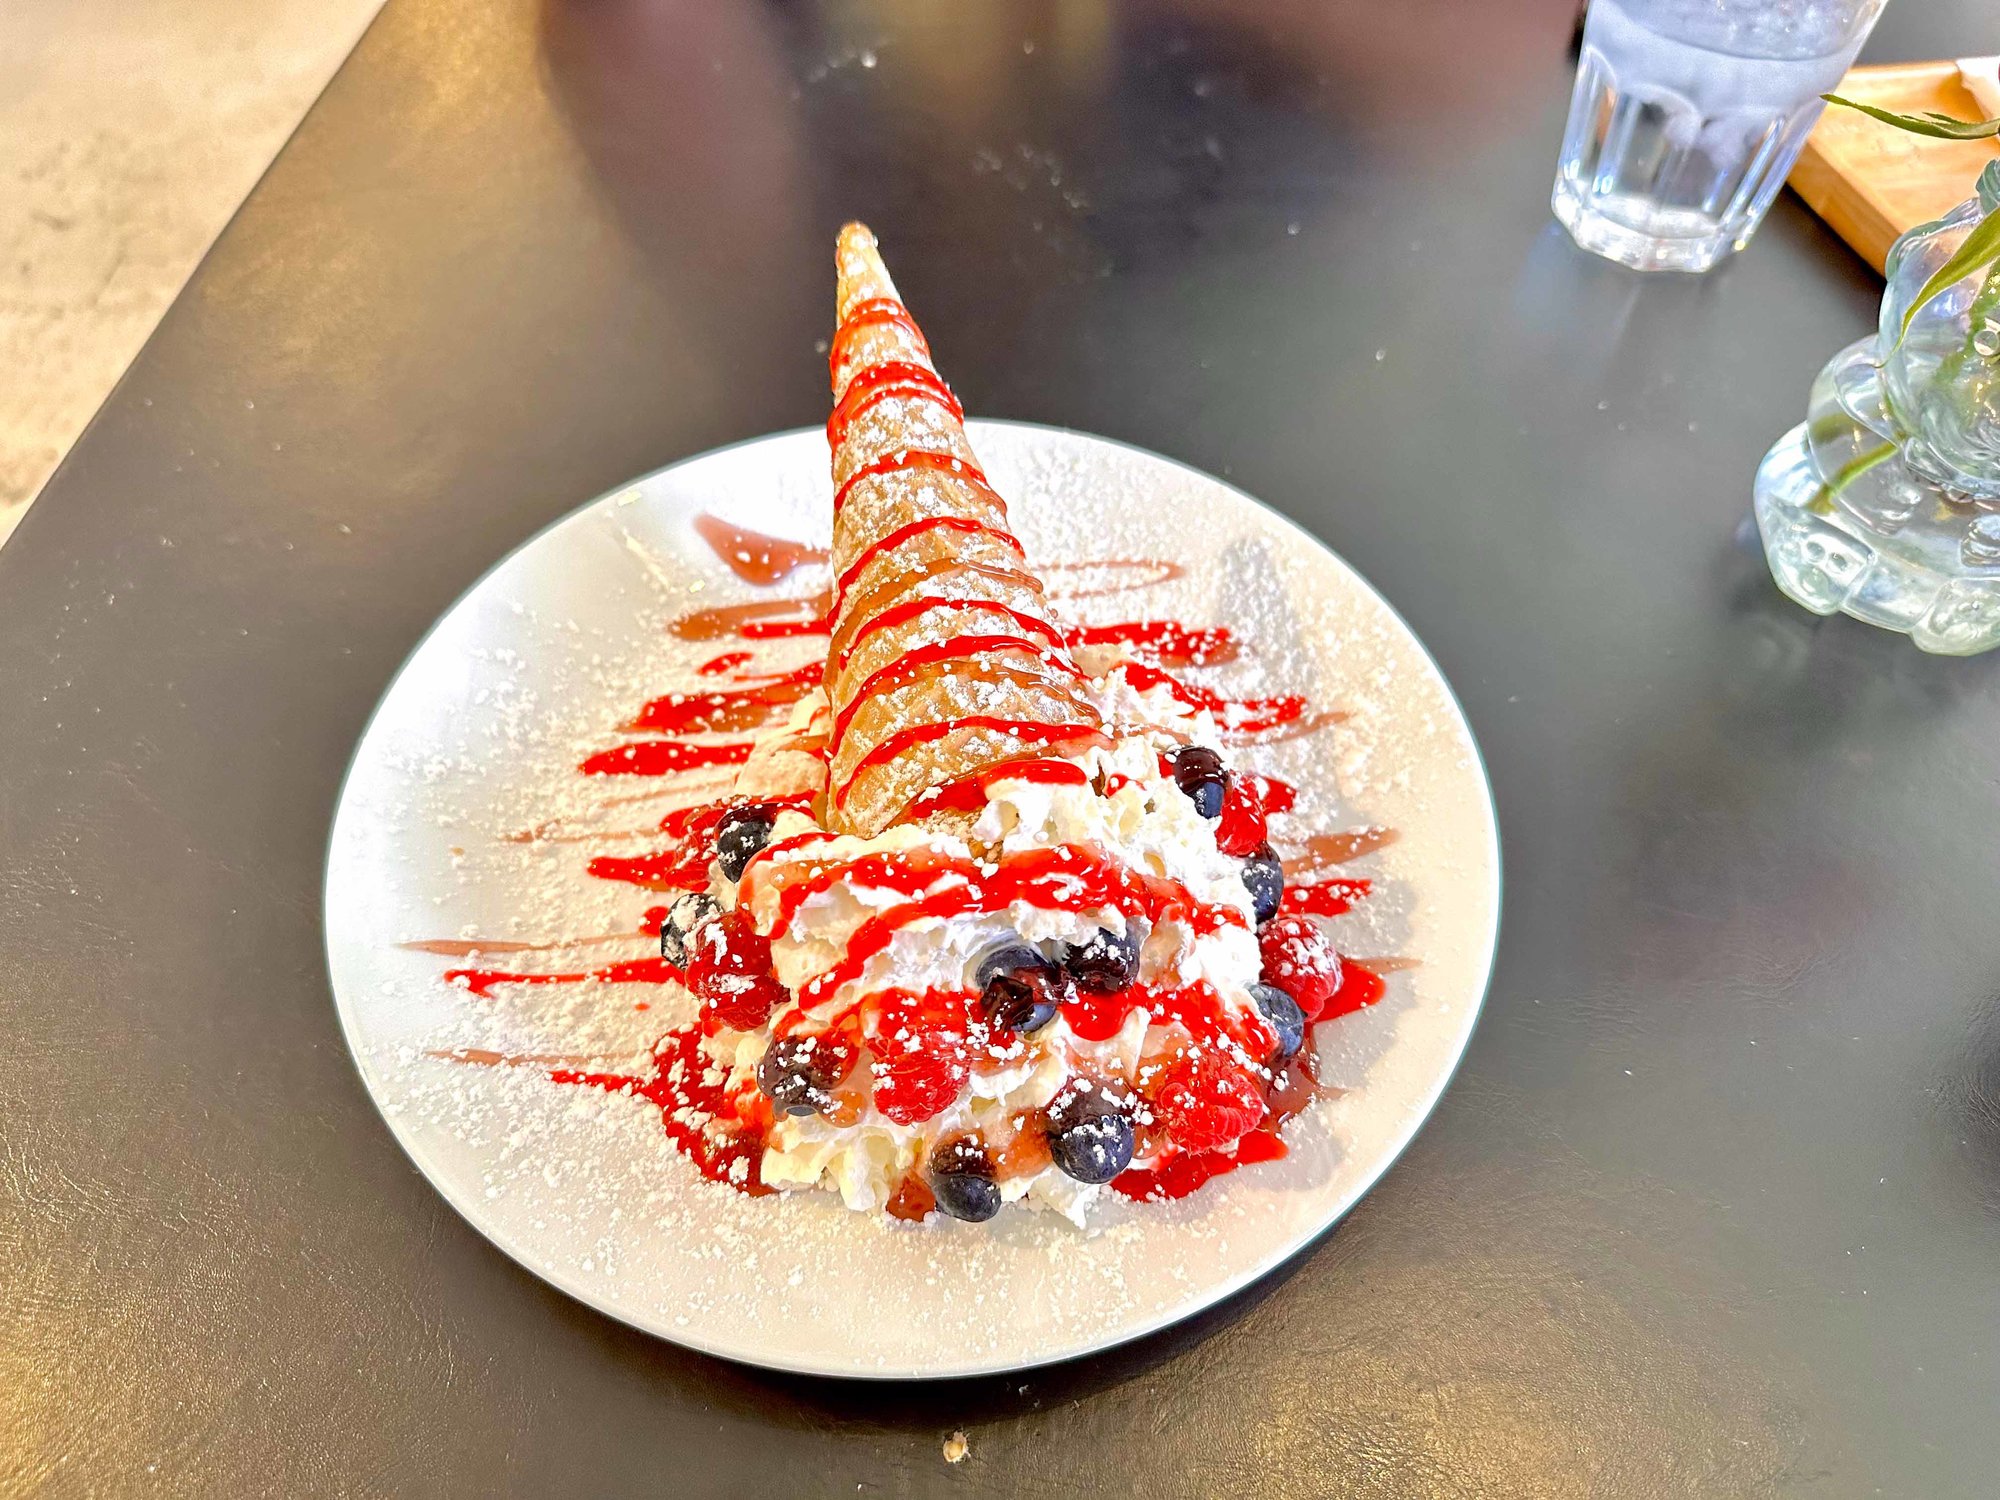 dessert cone with ice cream and whipped cream topped with fruit